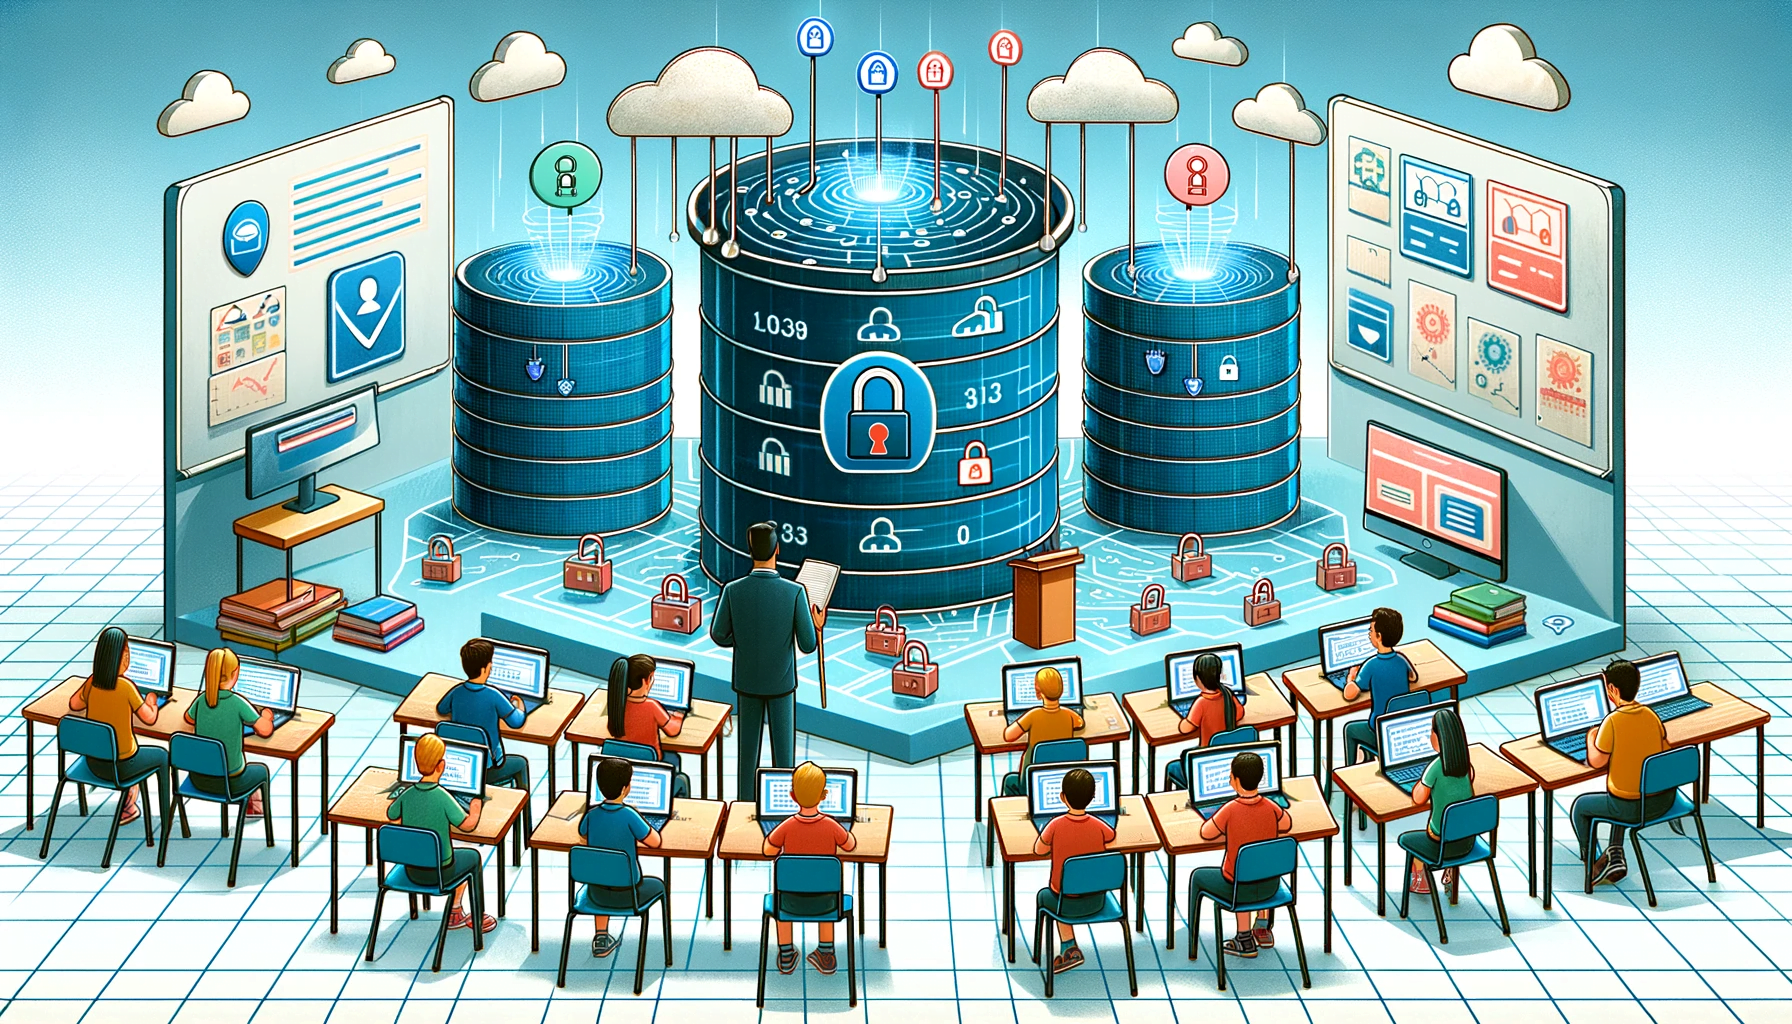 In a modern classroom, students and a teacher interact with AI tools on devices featuring privacy icons and padlocks, set against a backdrop of a fortified digital database representing secure student data.